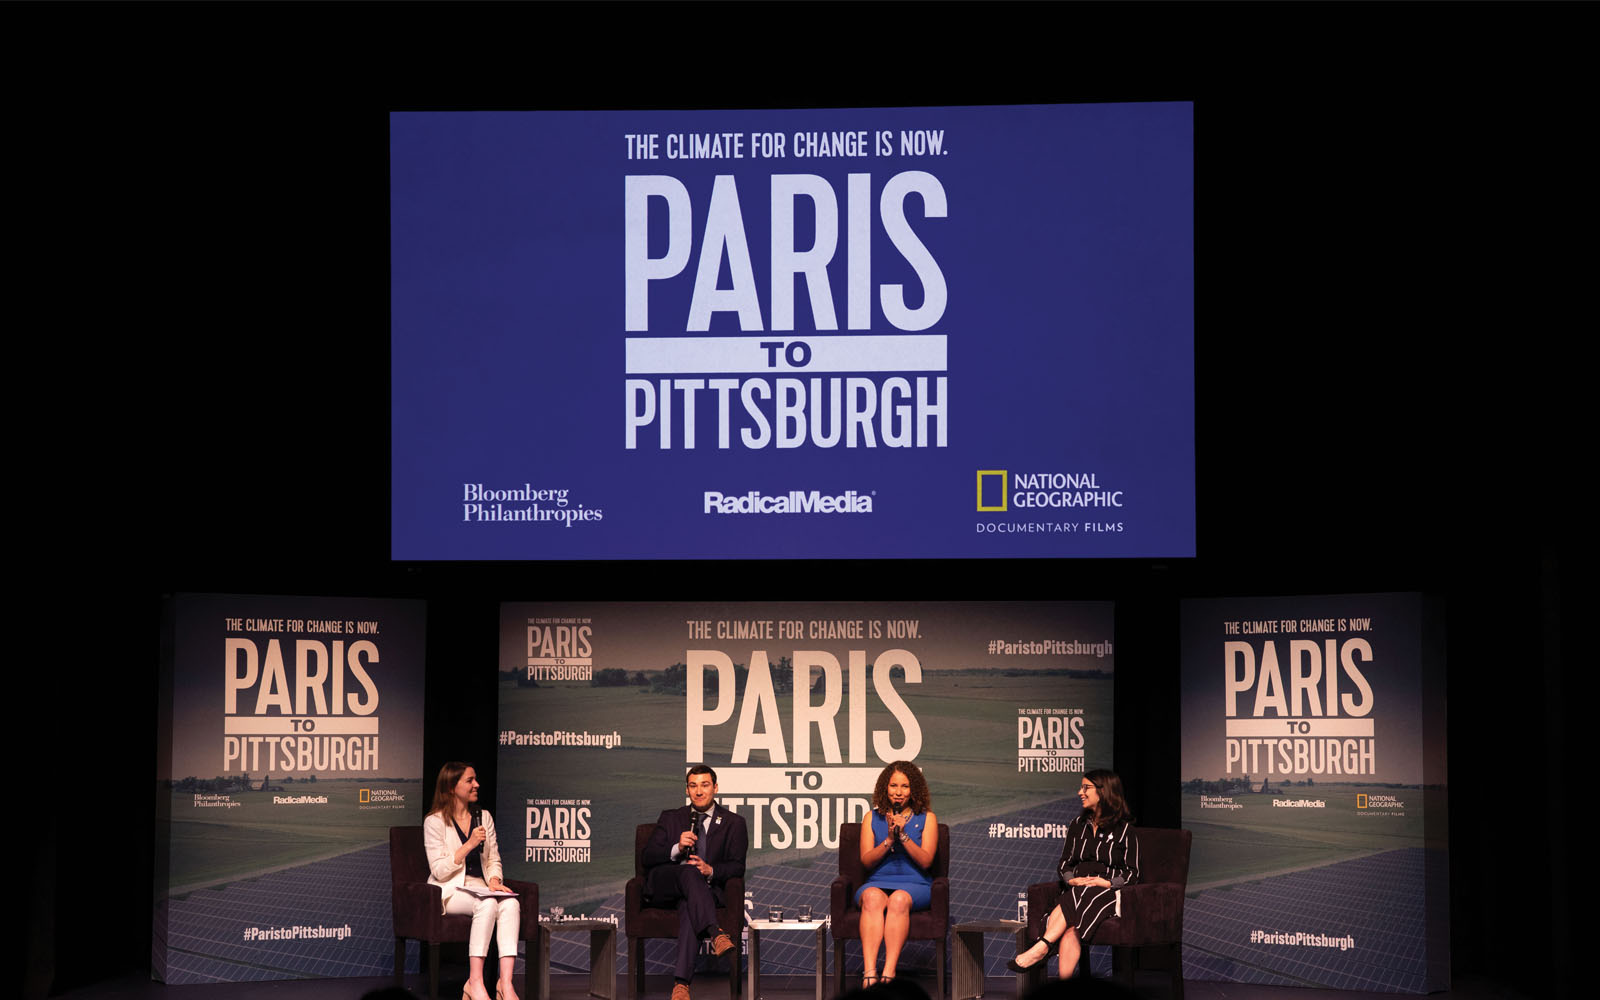 Panelists at an advance screening of Paris to Pittsburgh in Orlando, Florida.